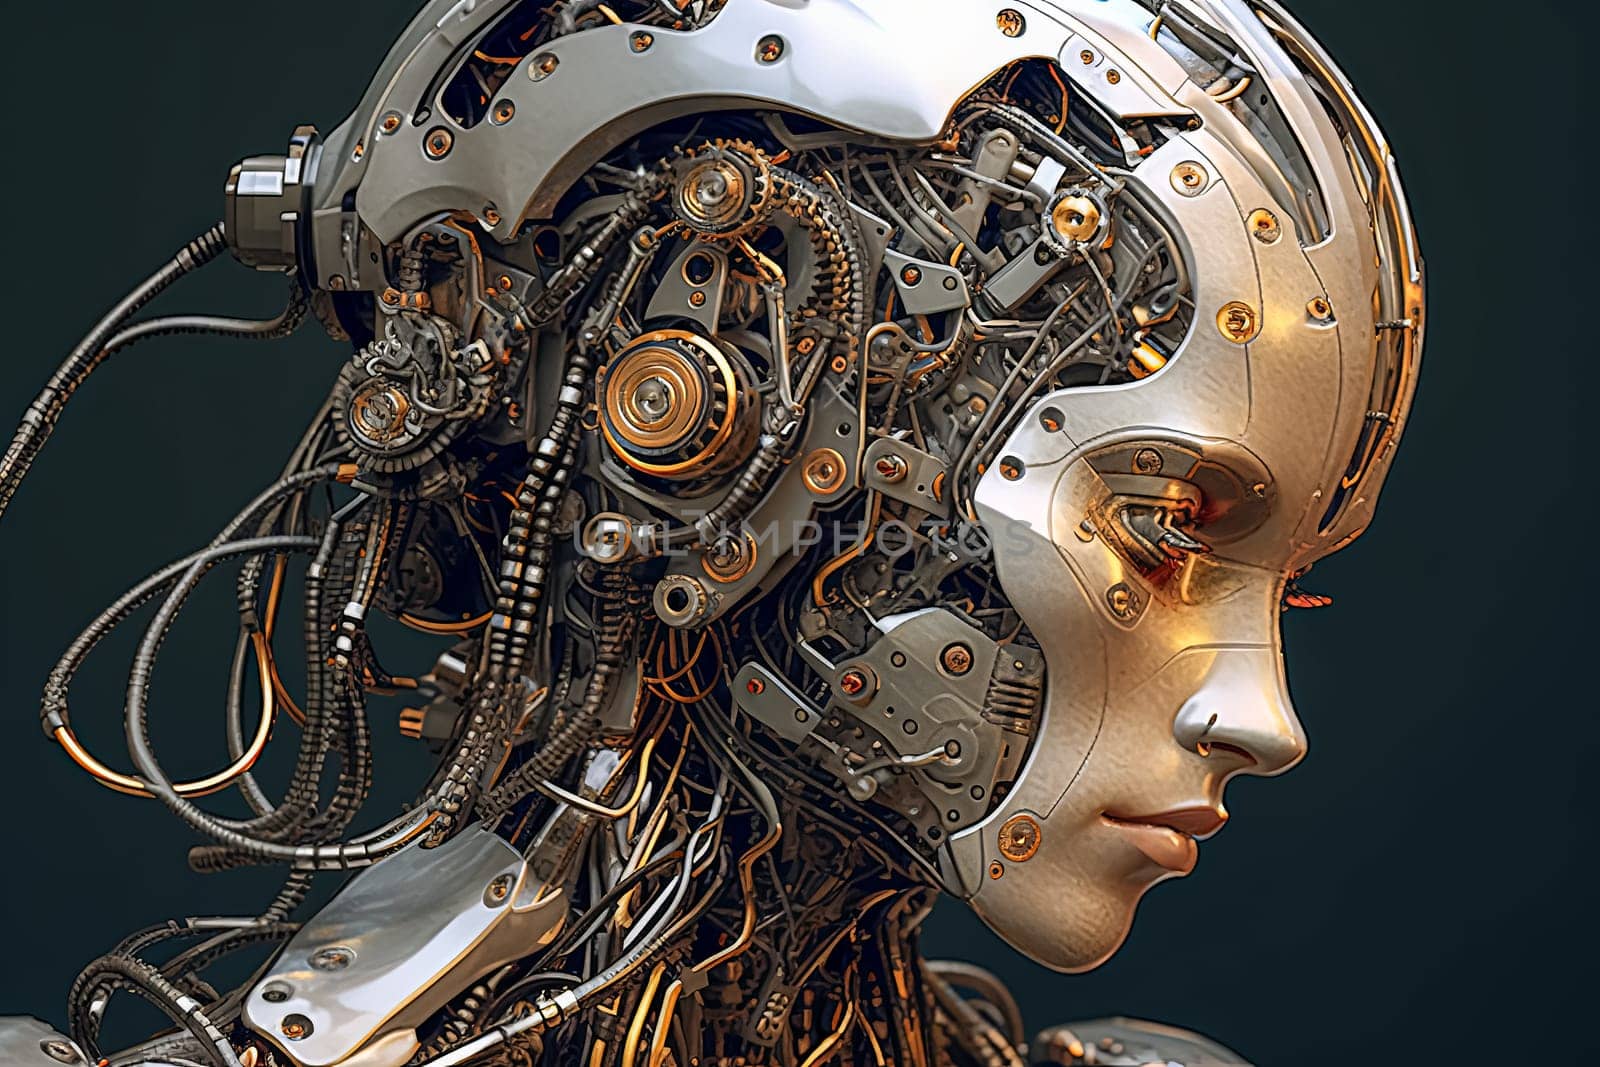 A woman with a robotic face is shown in a grey background. The image is a representation of the future, with the woman's robotic features symbolizing the advancement of technology